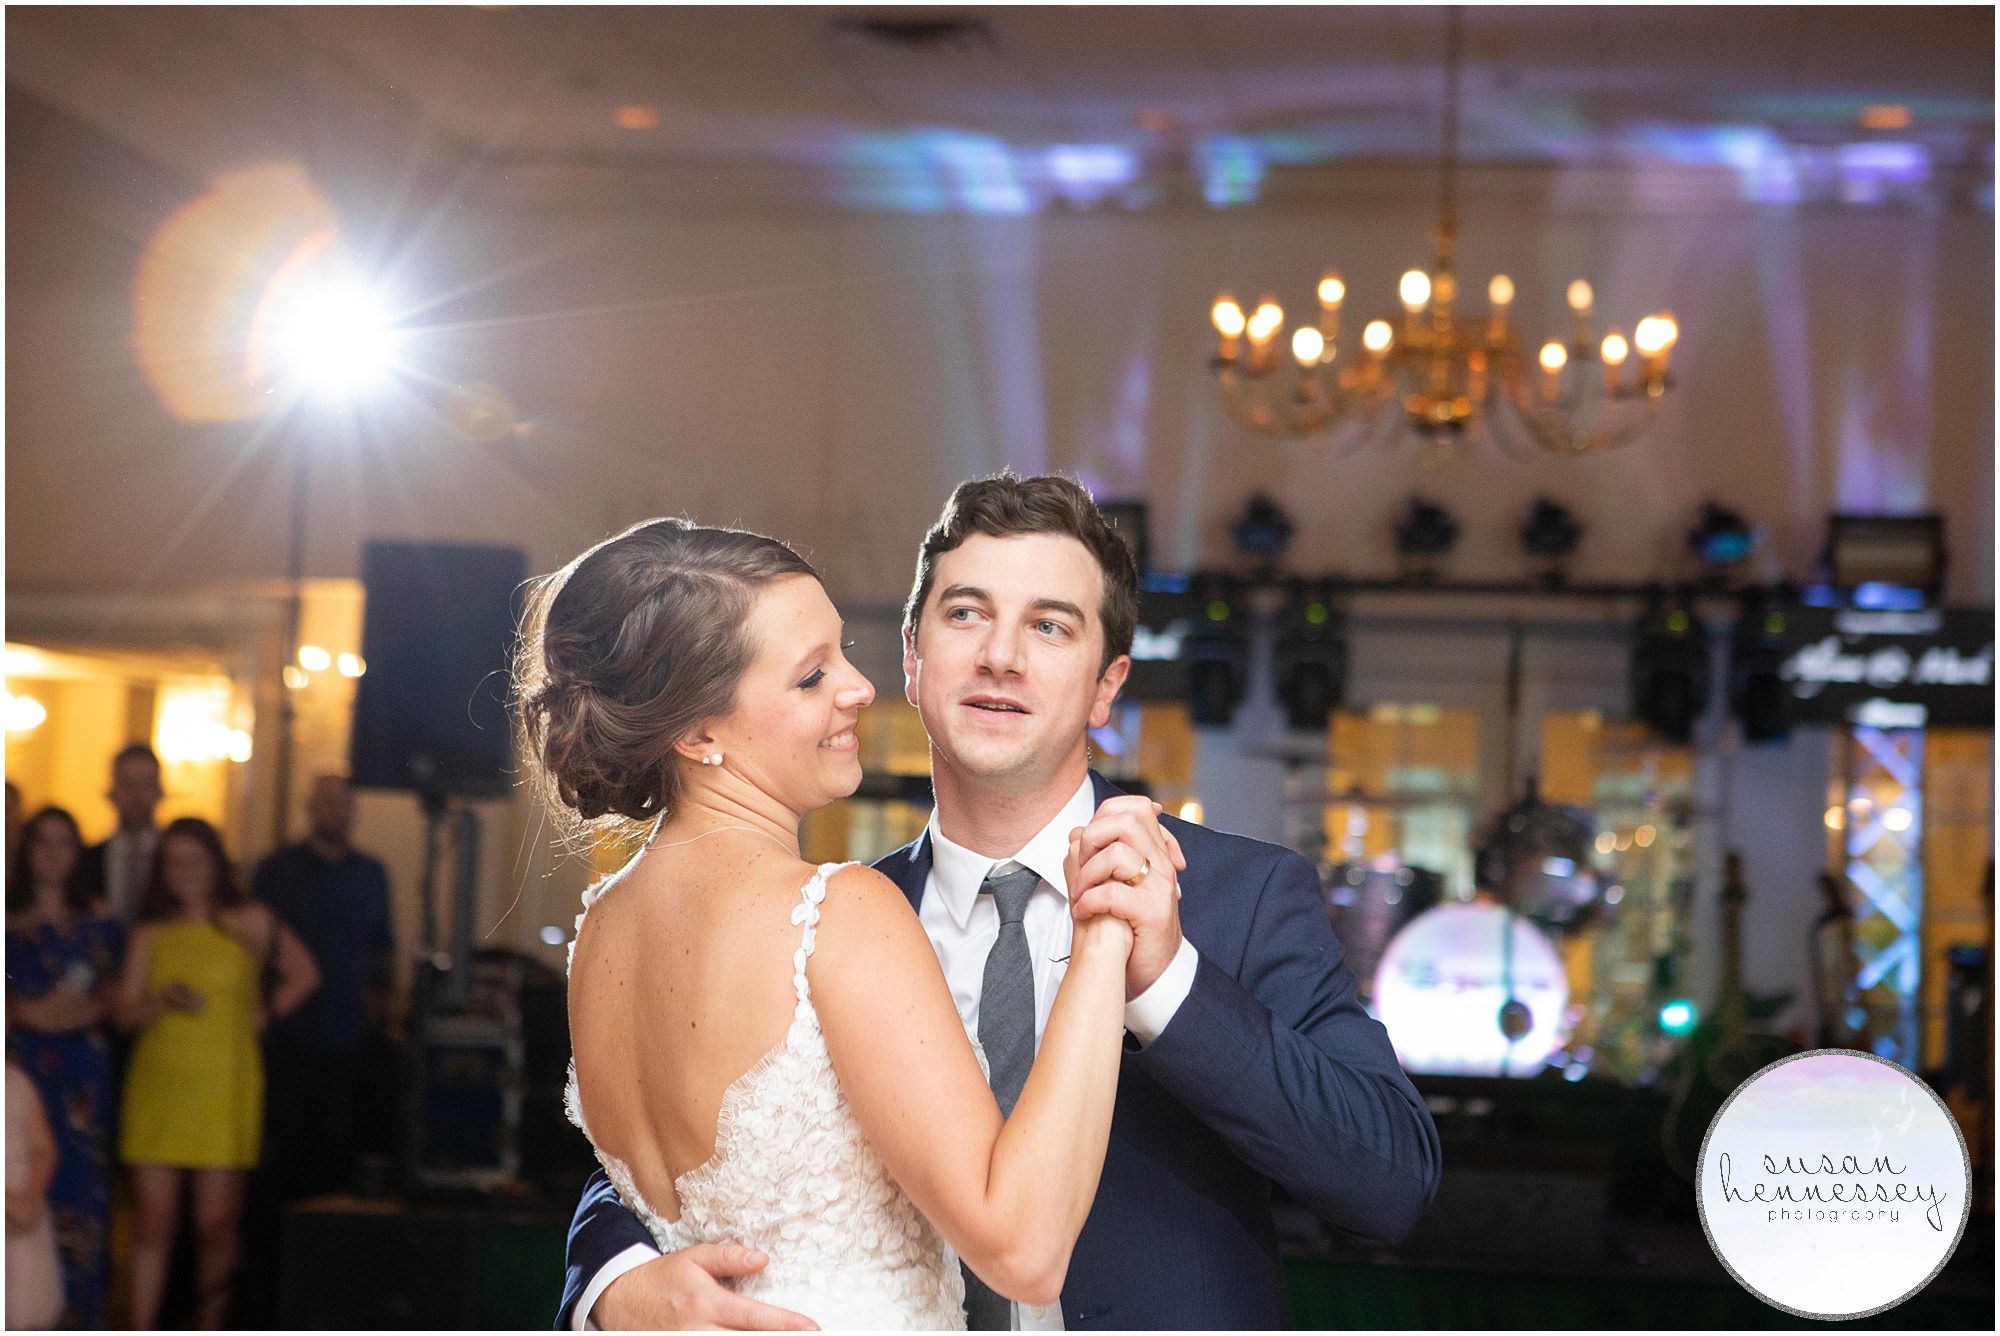 First dance for bride and groom at Forsgate Country Club wedding